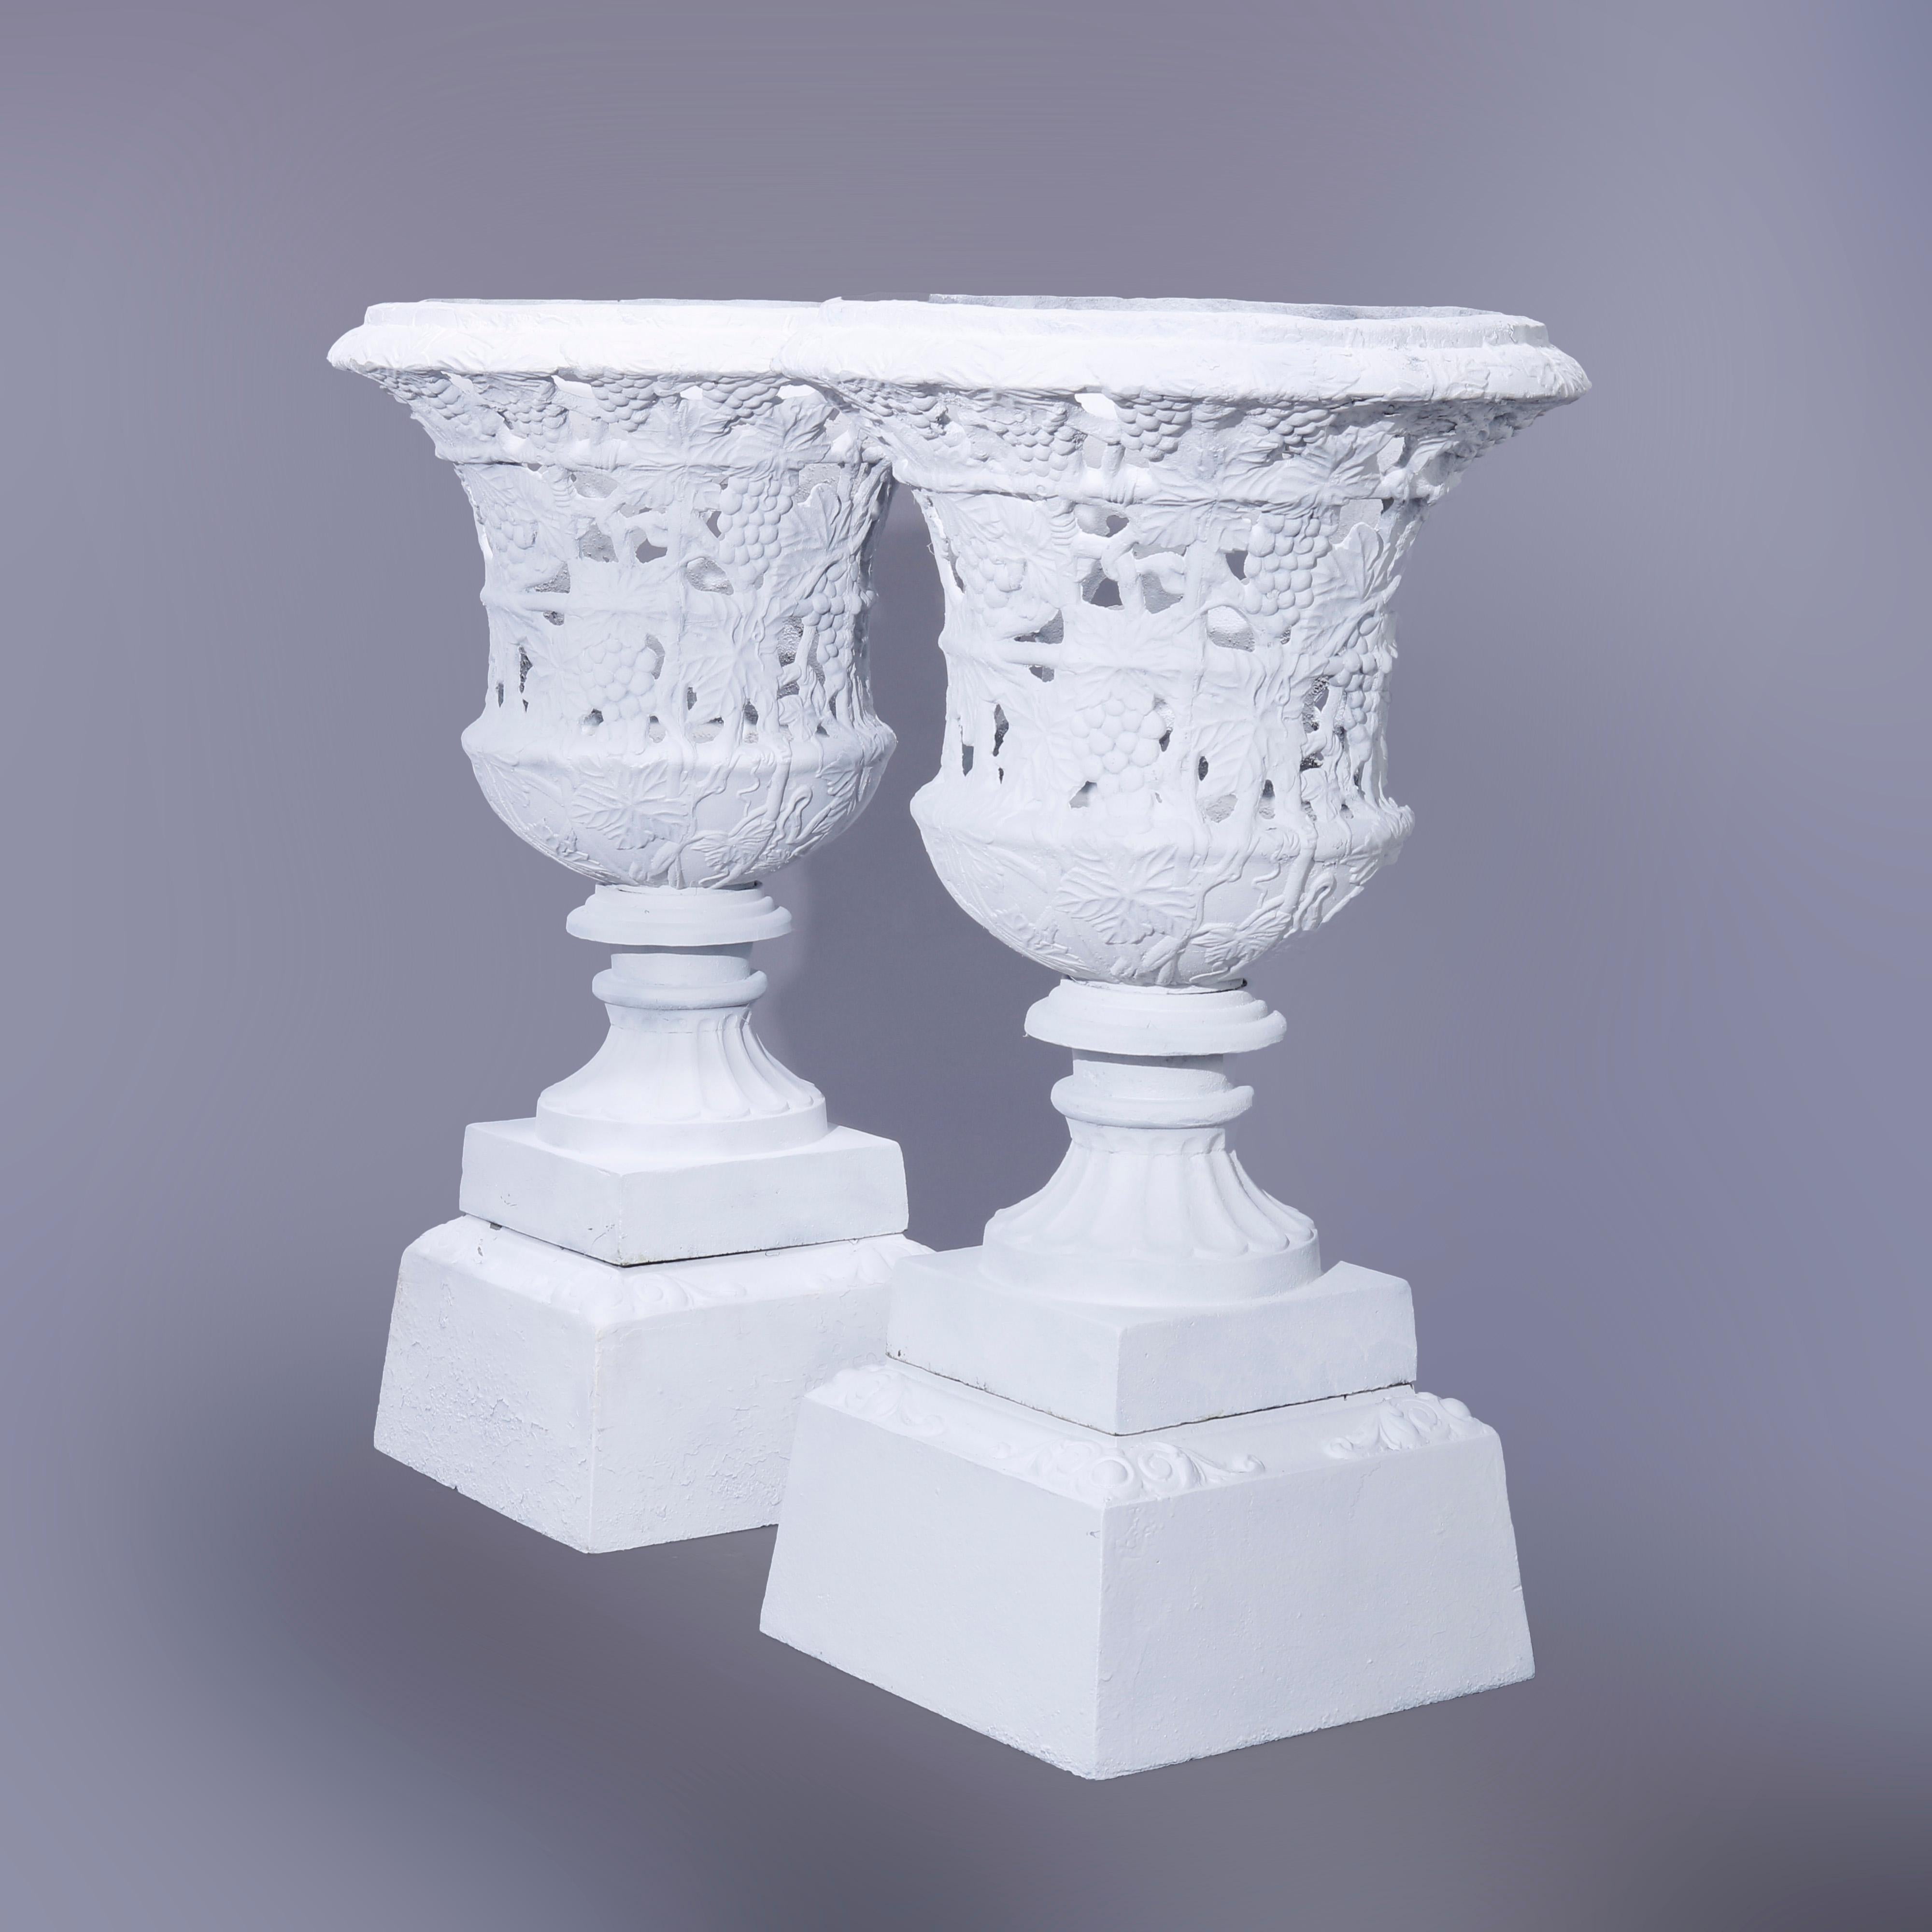 20th Century Pair Oversized Cast Iron Reticulated Grape & Leaf Garden Urns & Bases, 20th C